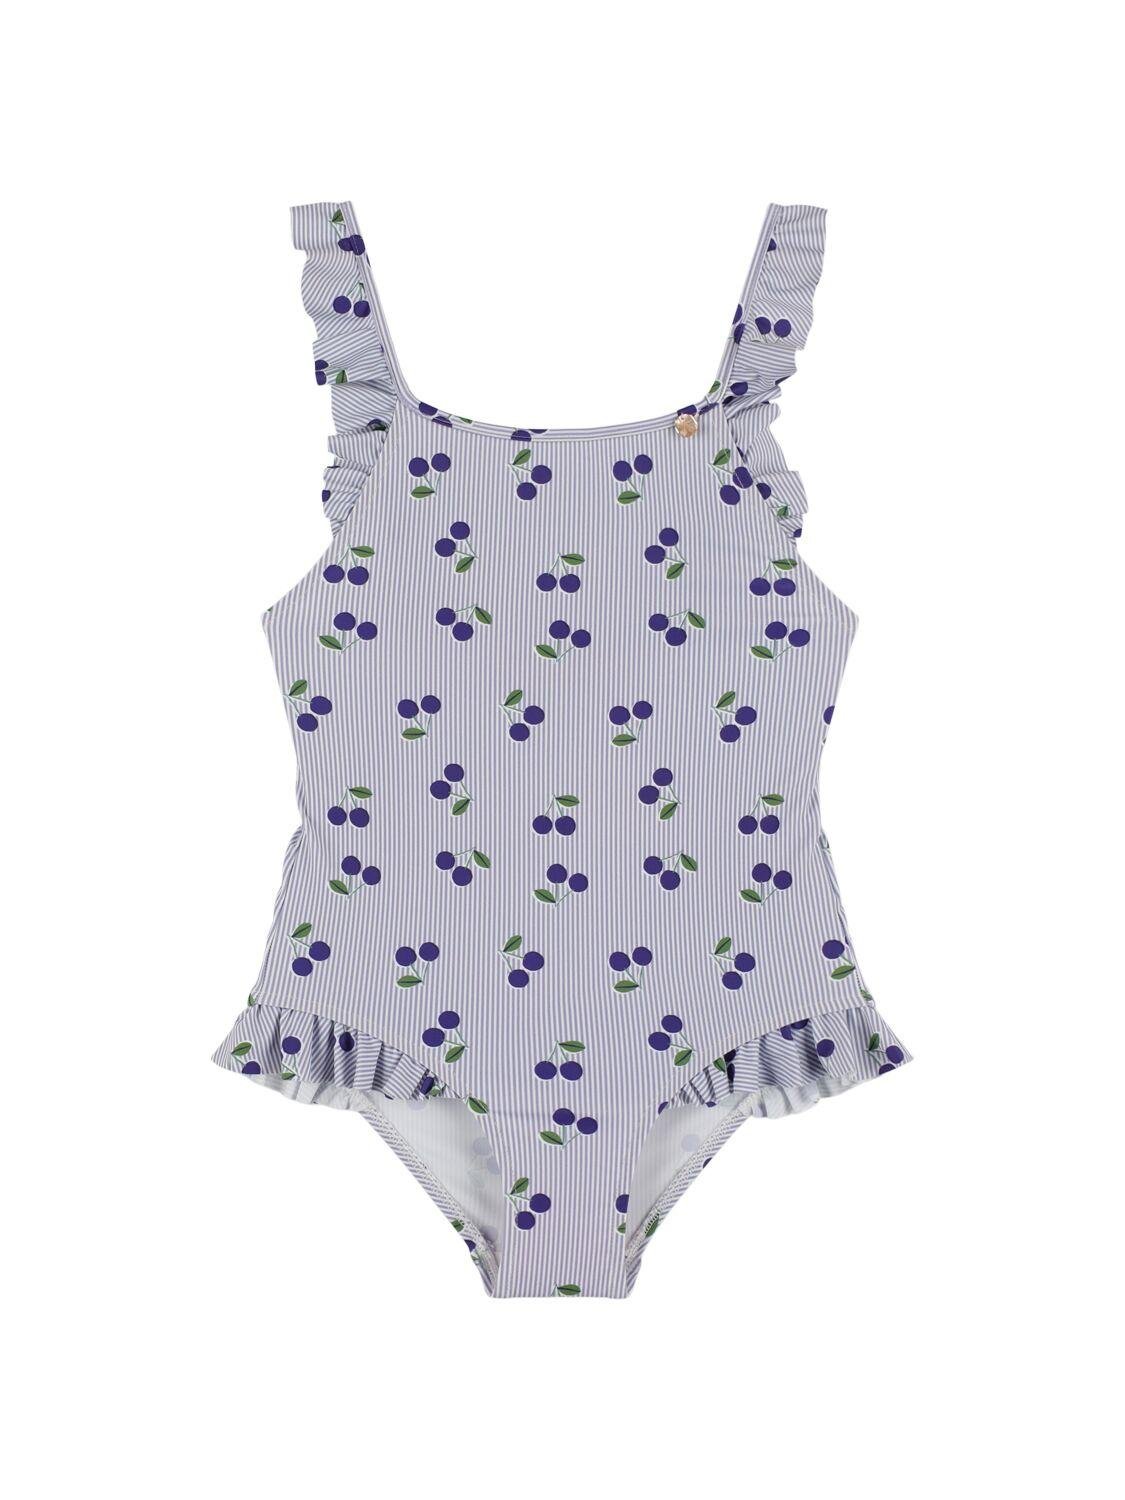 Cherry Print Tech One-piece Swimsuit by BONPOINT